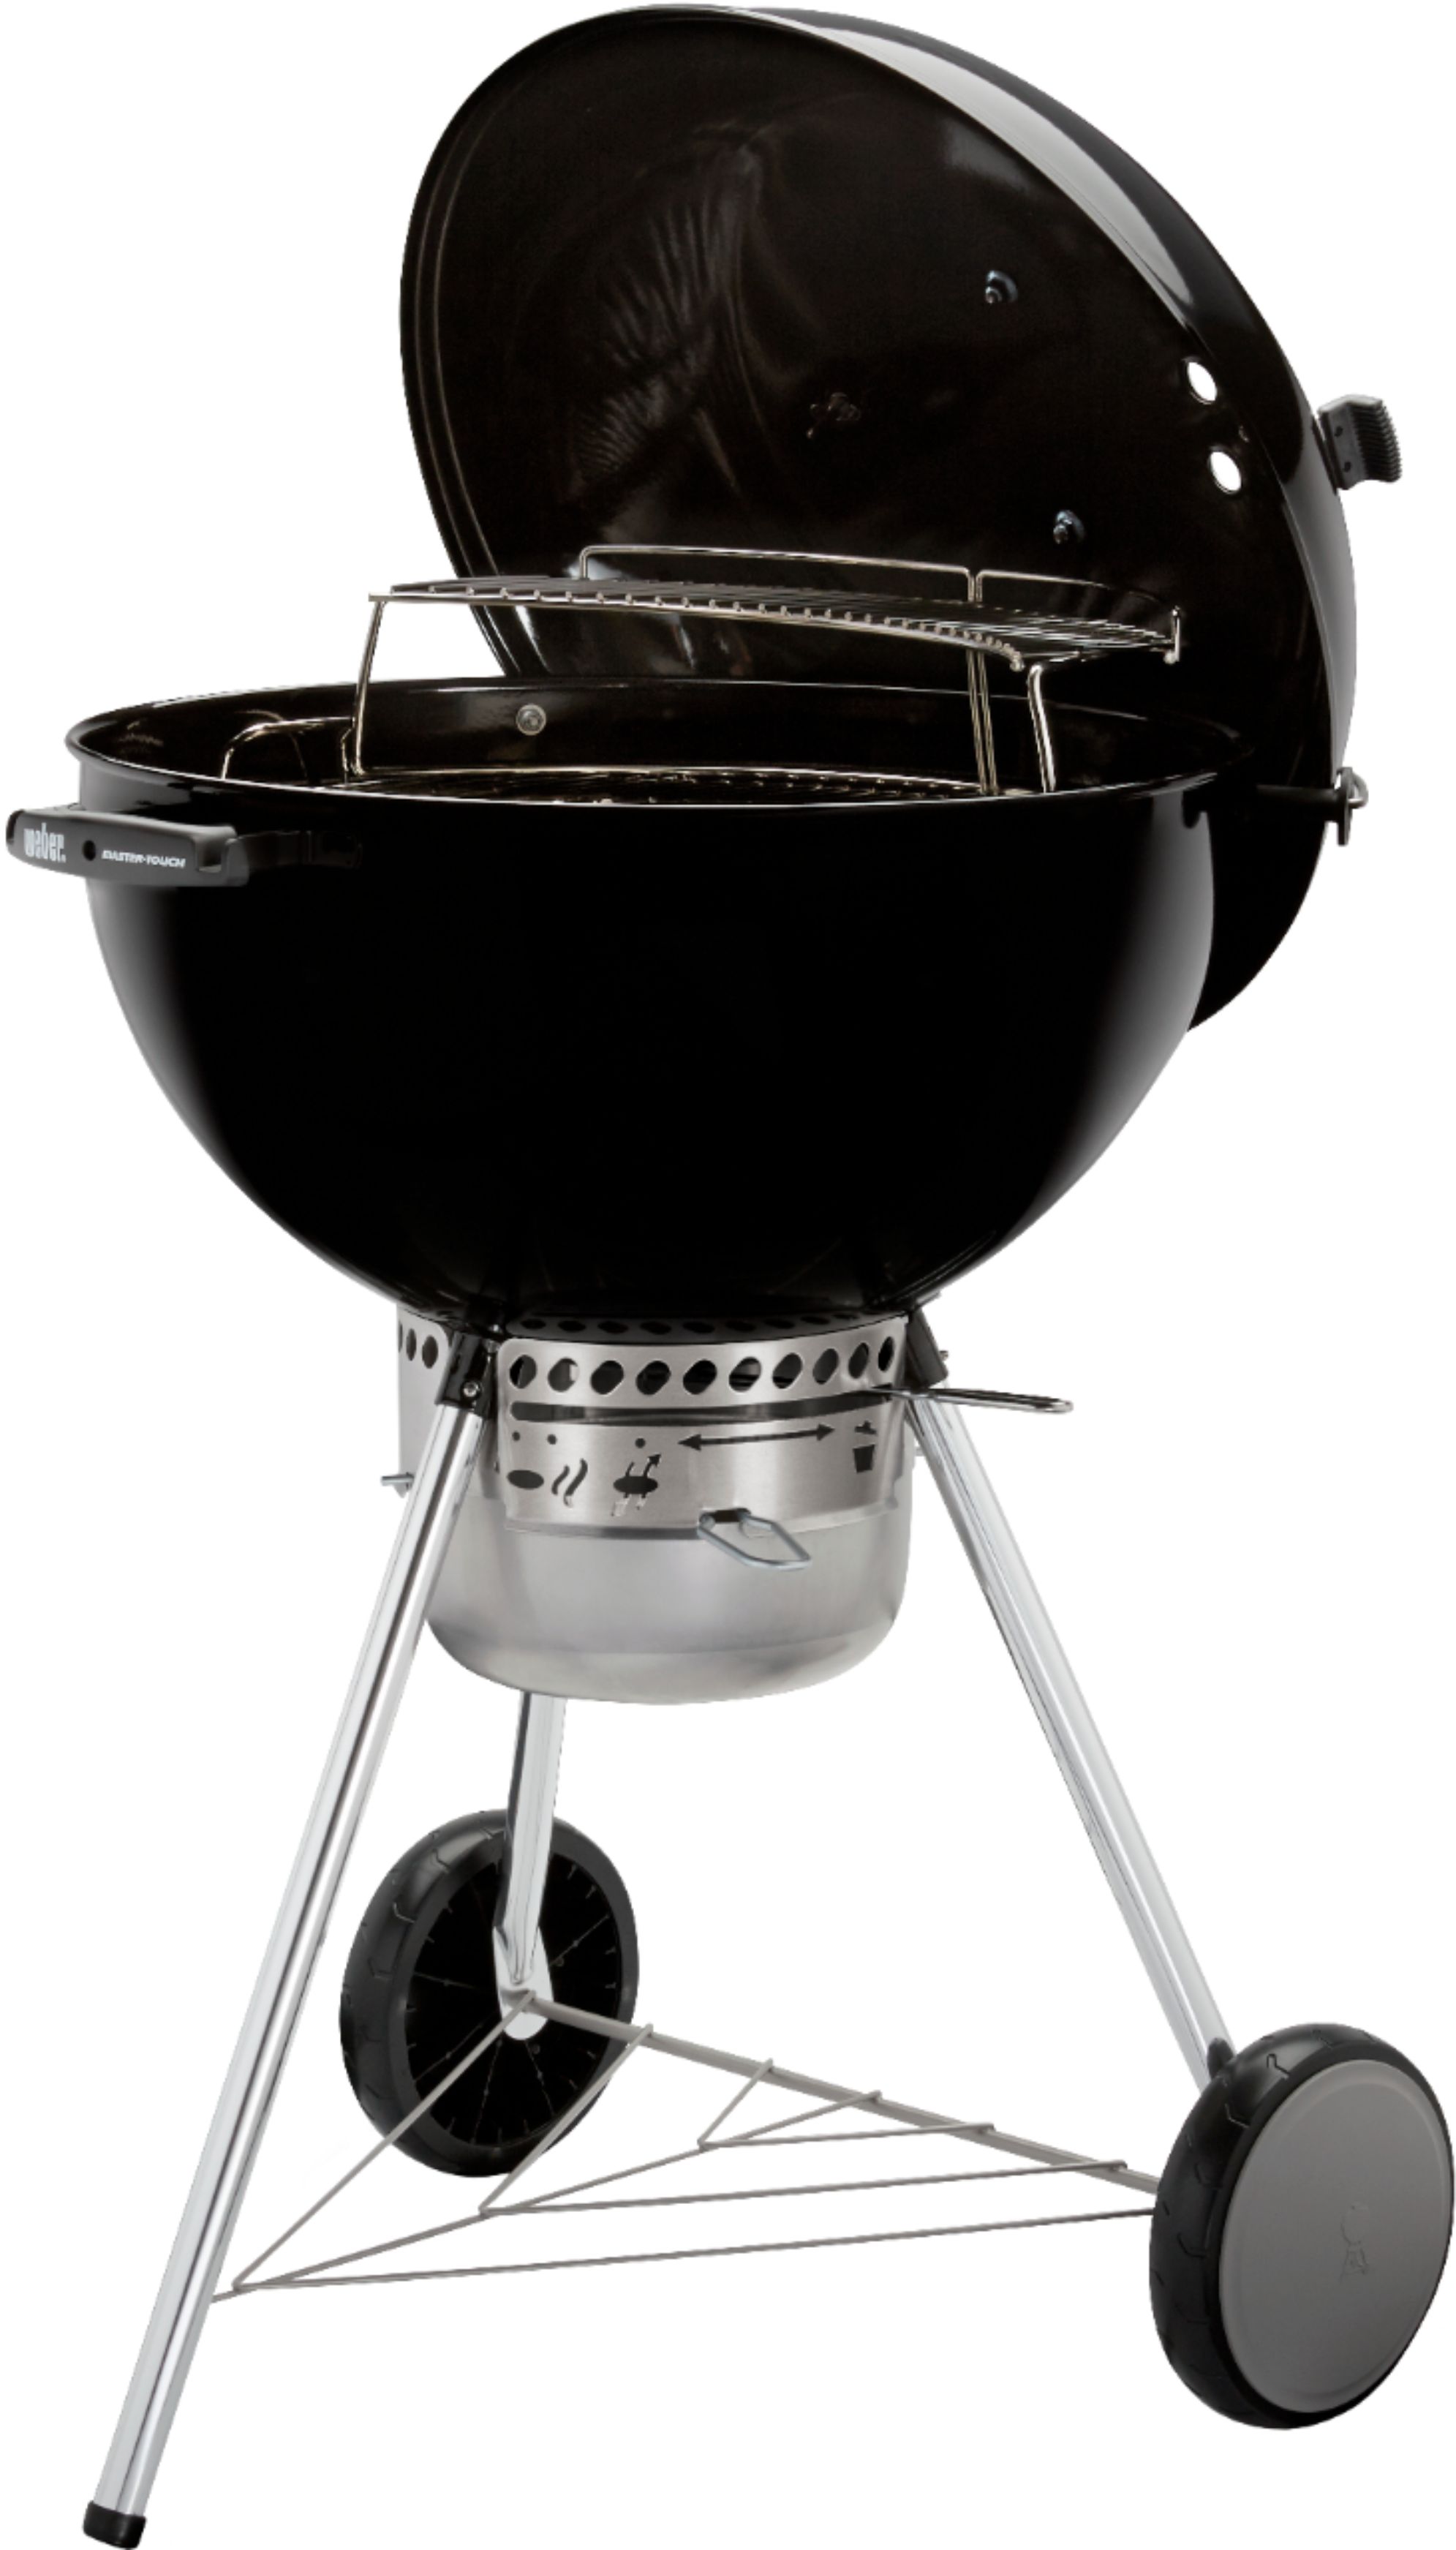 Watchful Ed væv Weber 22 in. Master-Touch Charcoal Grill Black 14501001 - Best Buy